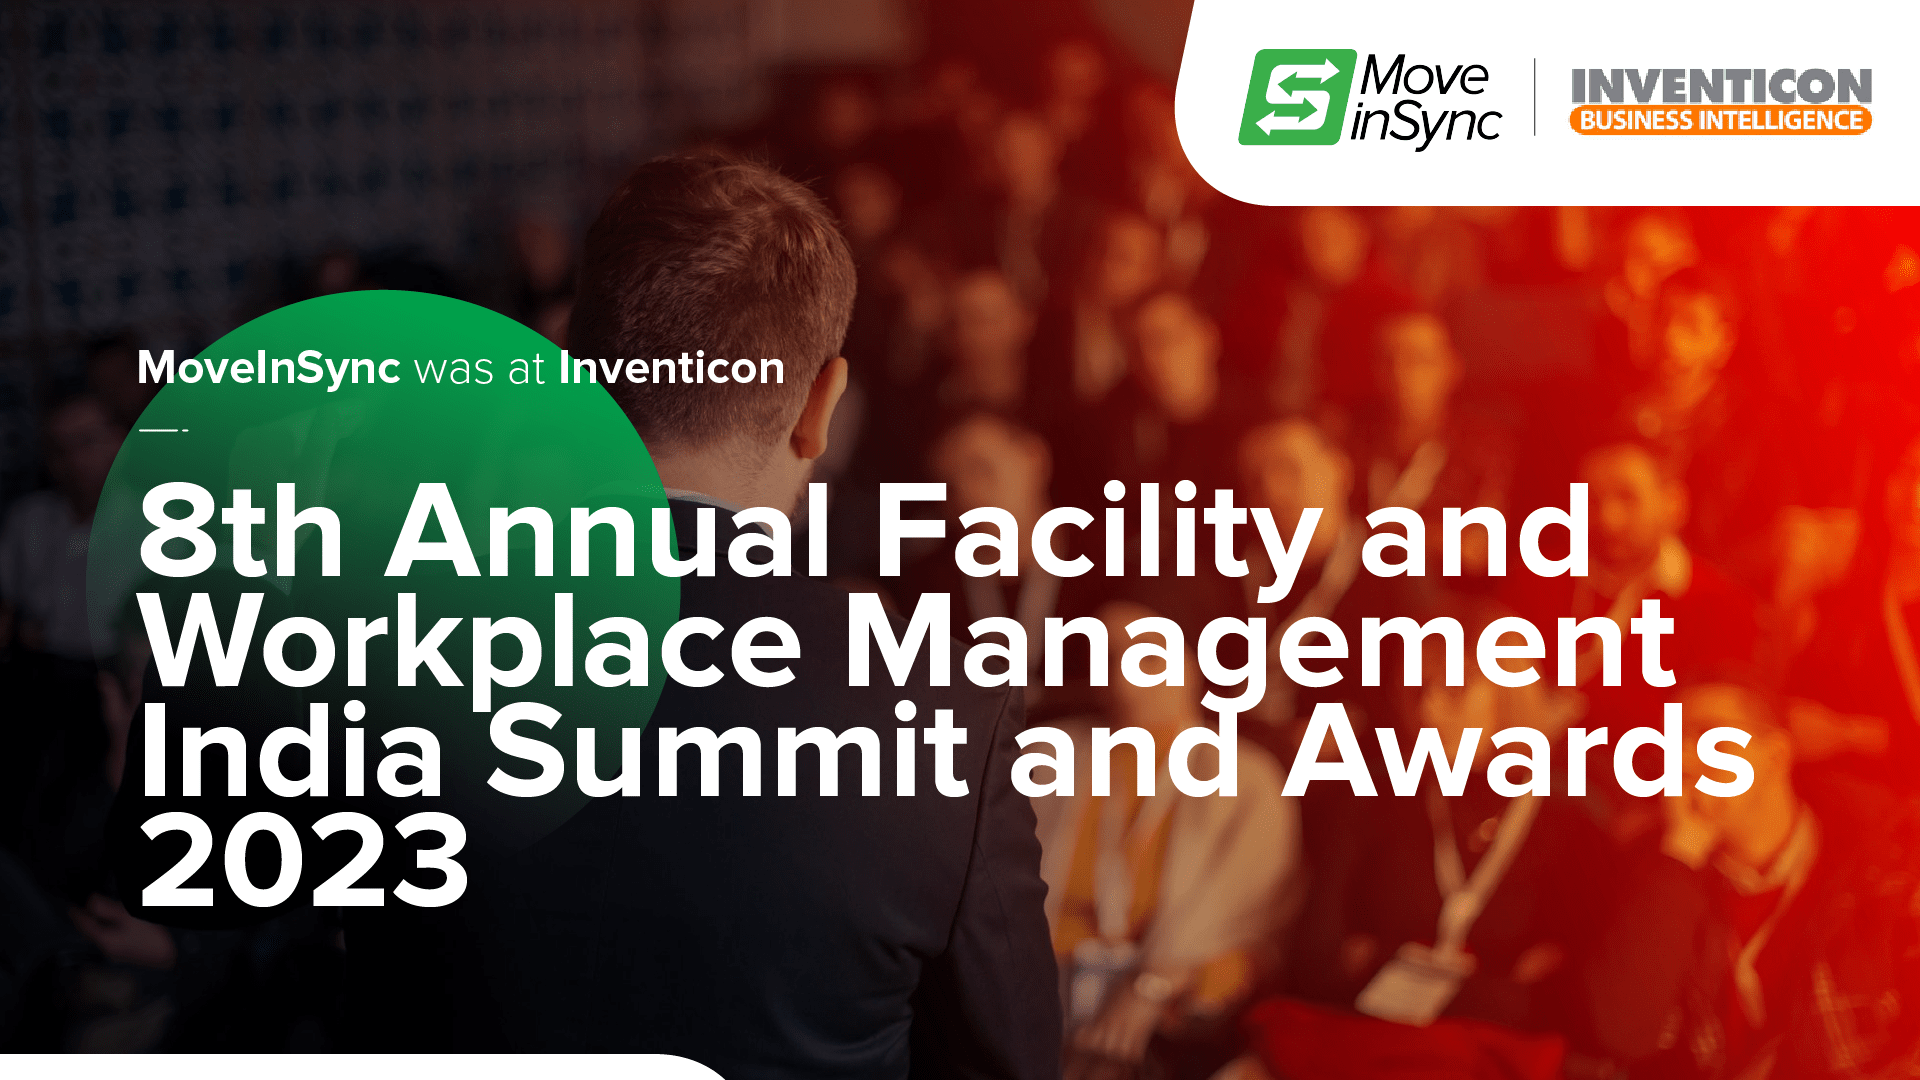 Inventicon 8th Annual Facility and Workplace Management India Summit and Awards 2023